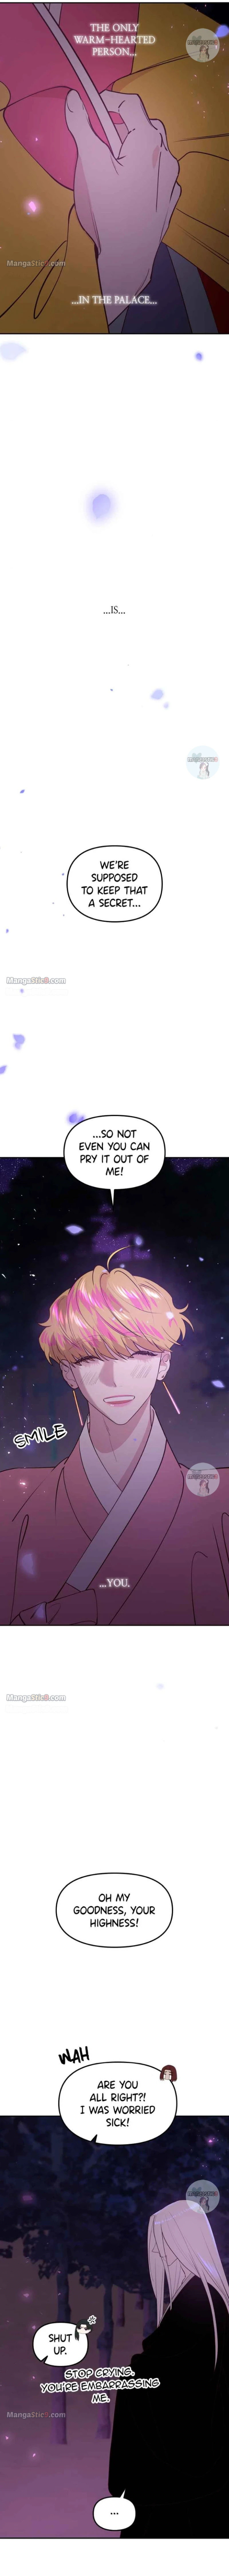 The Prince of Myolyeong chapter 74